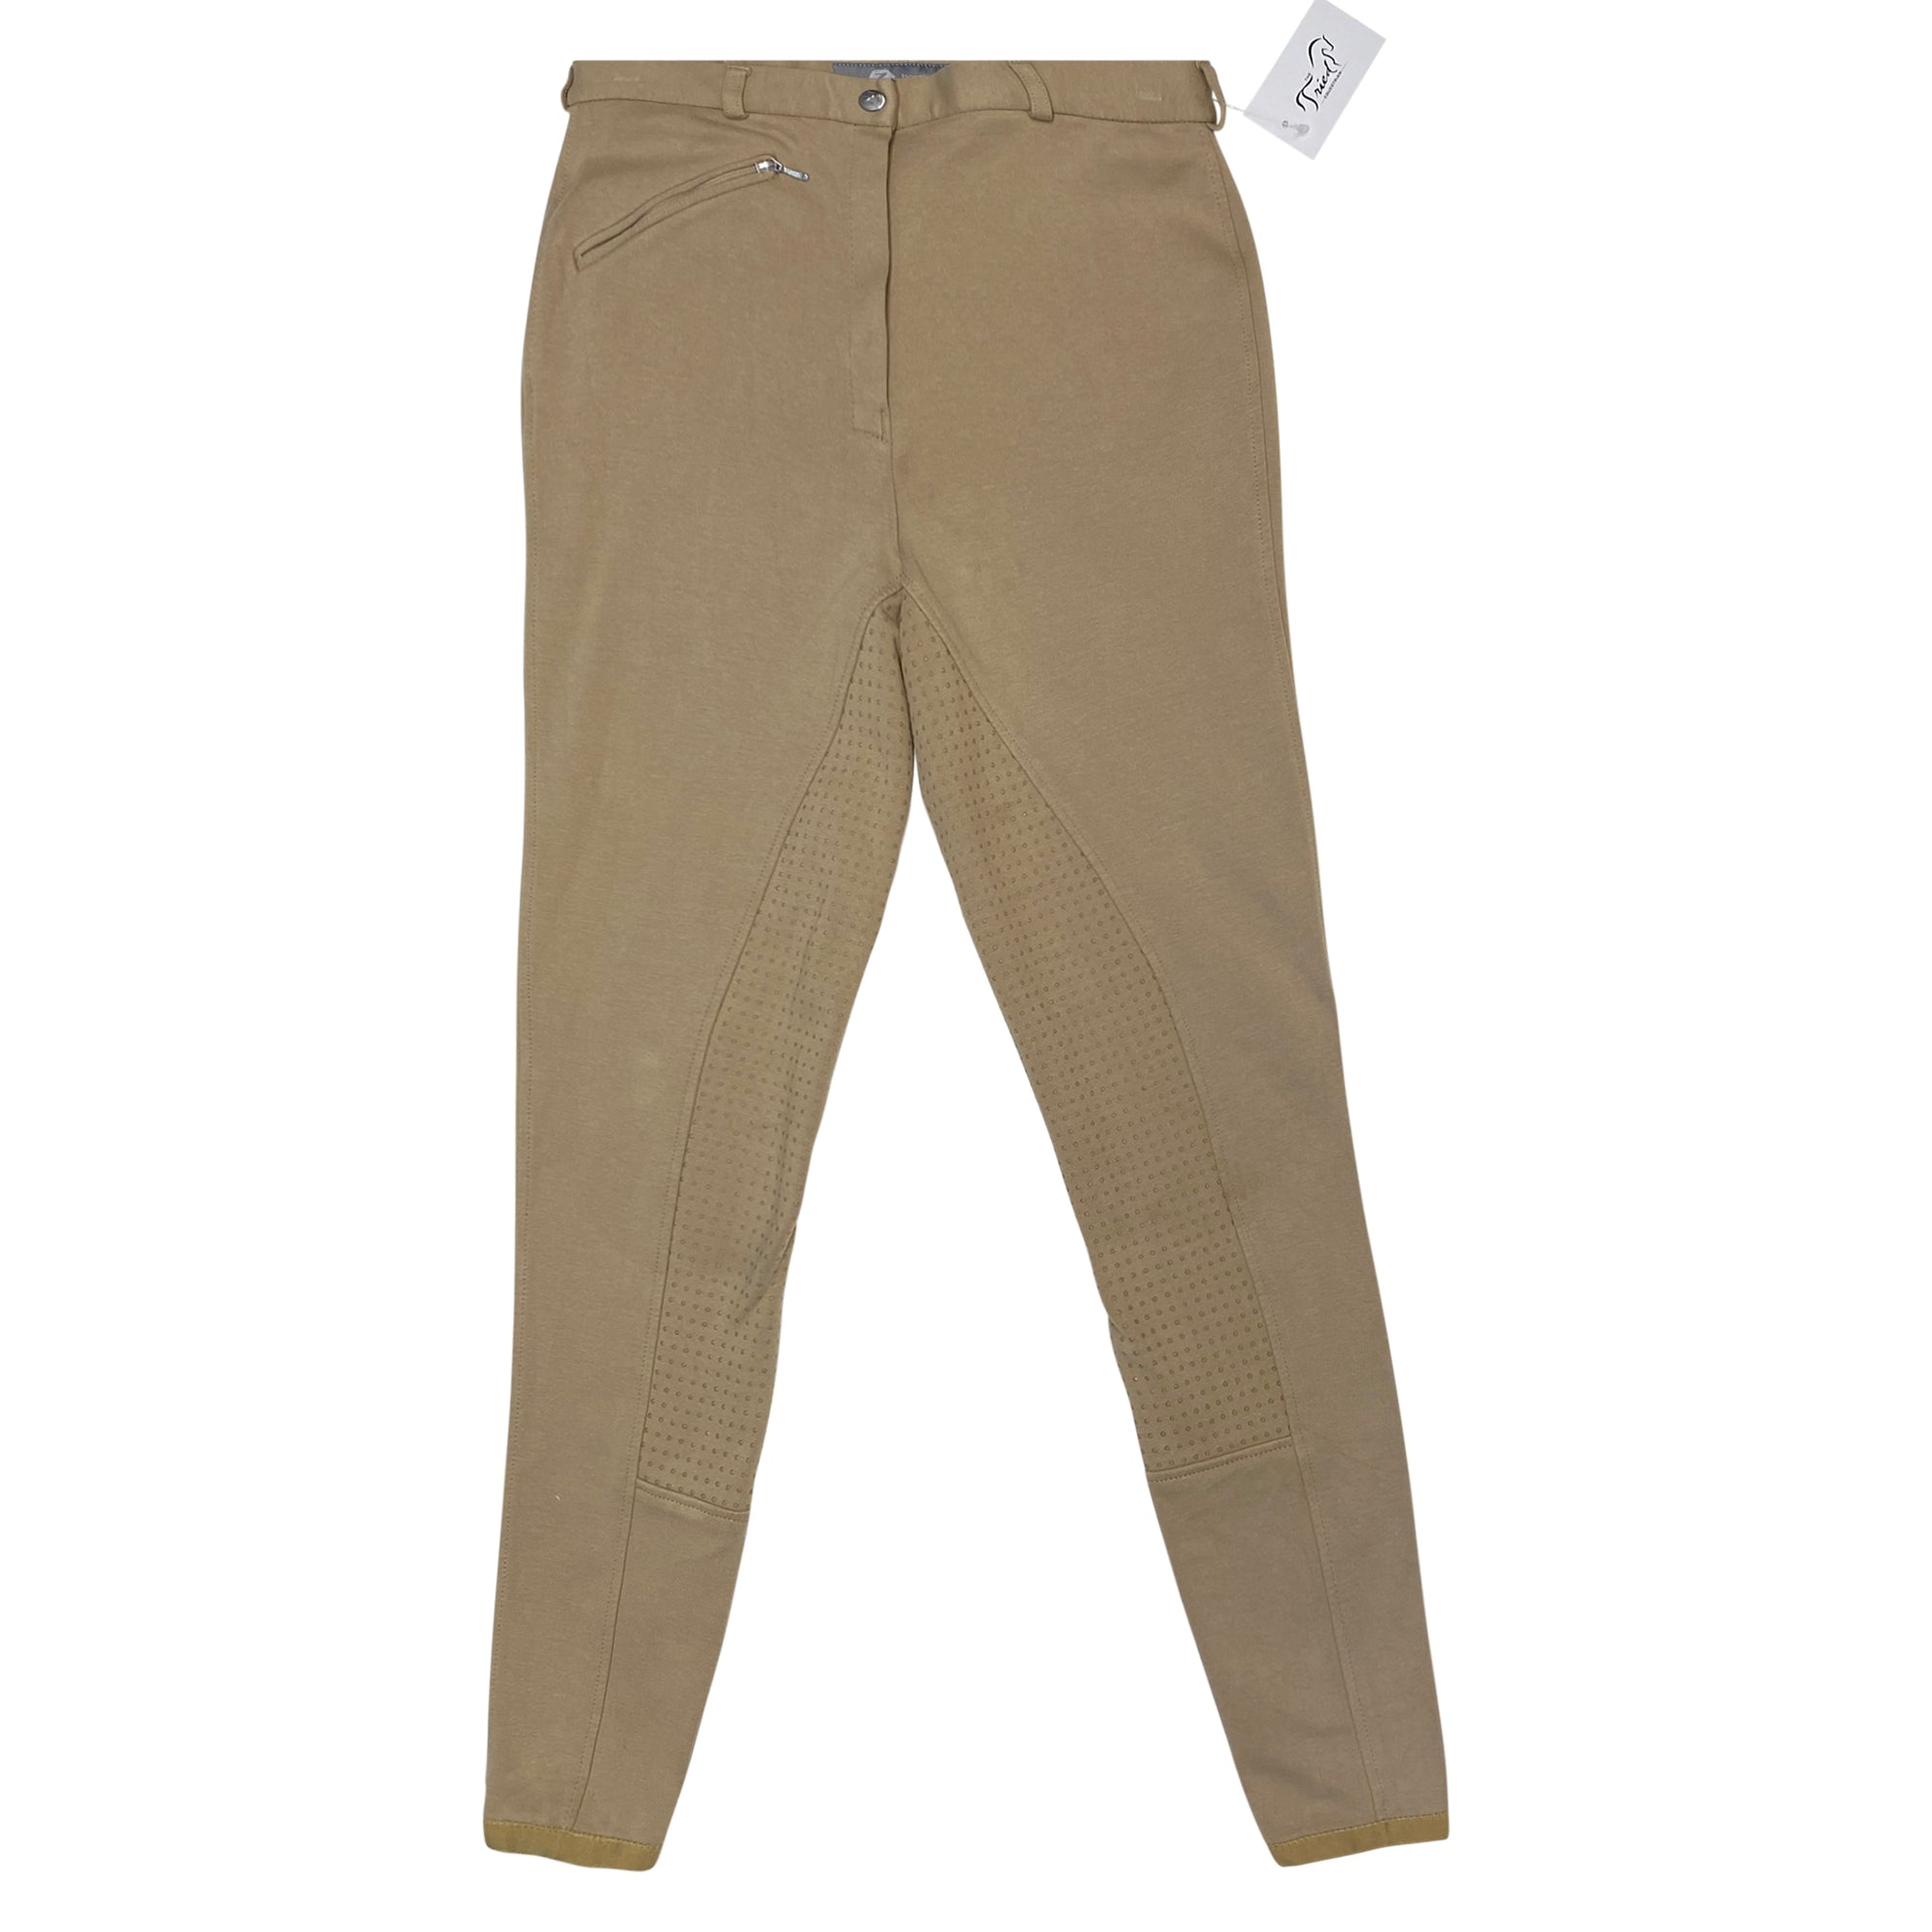 Horze Active Silicone Grip Full Seat Breeches in Tan